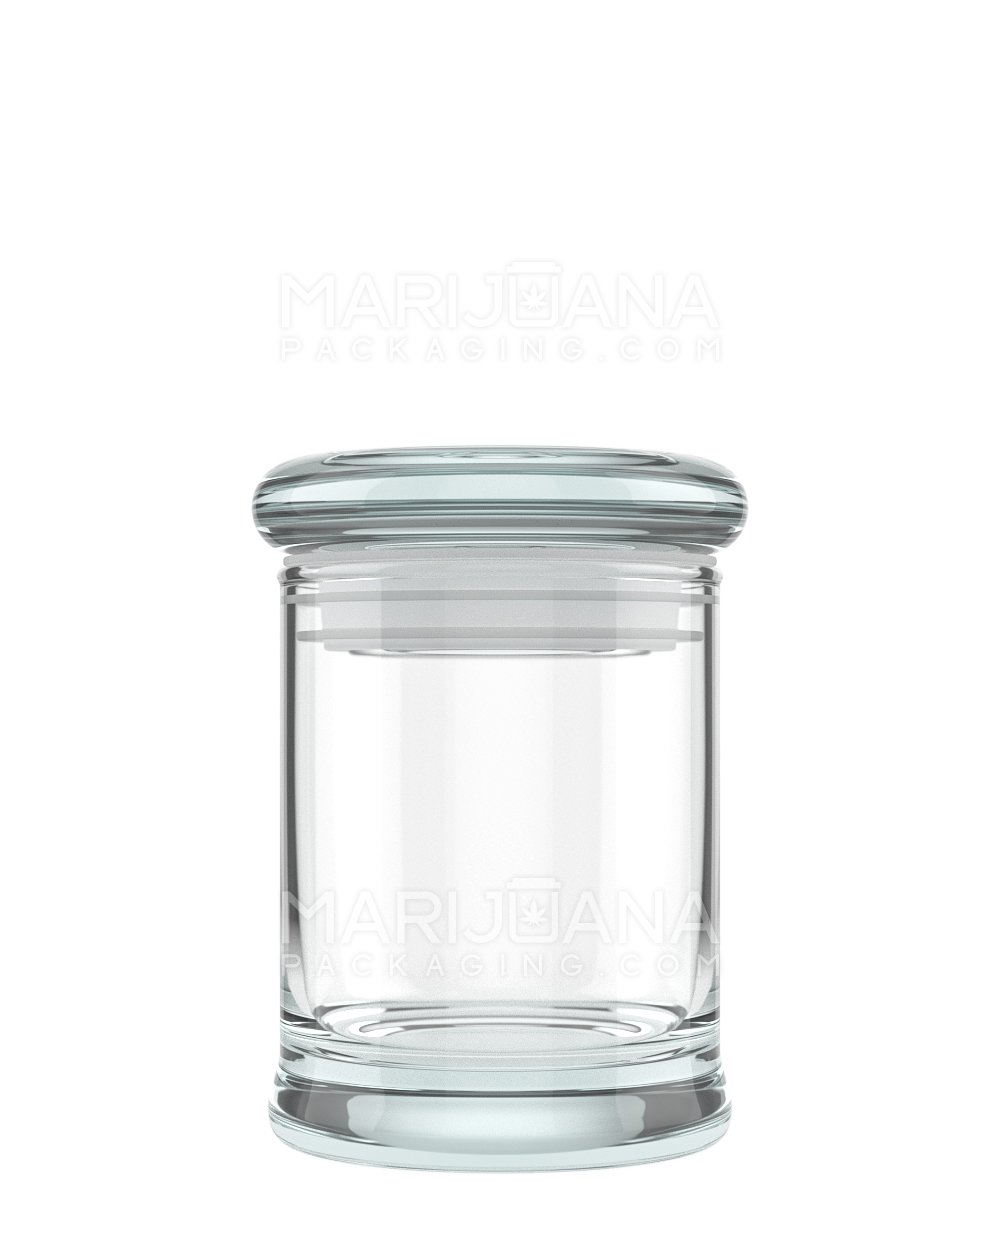 Straight Sided Clear Glass Jar with Lid | 2oz - Clear Glass - 64 Count - 1